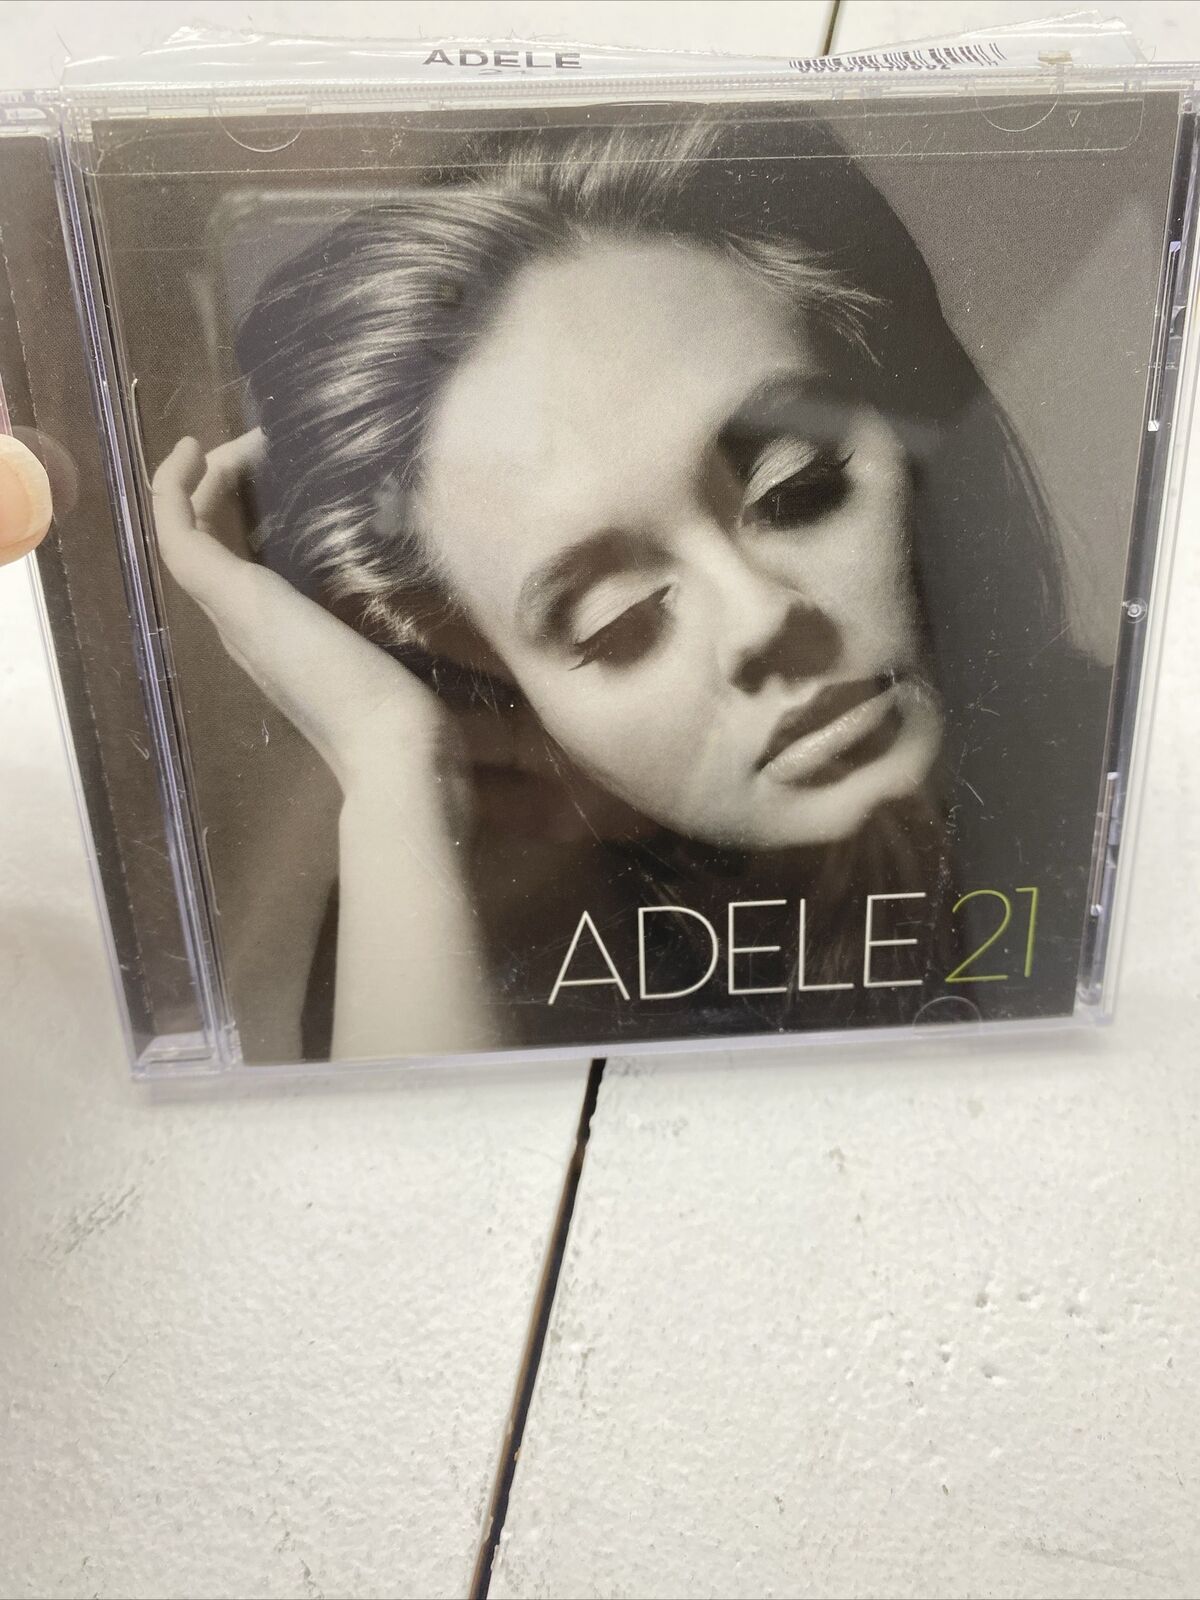 21 by Adele CD